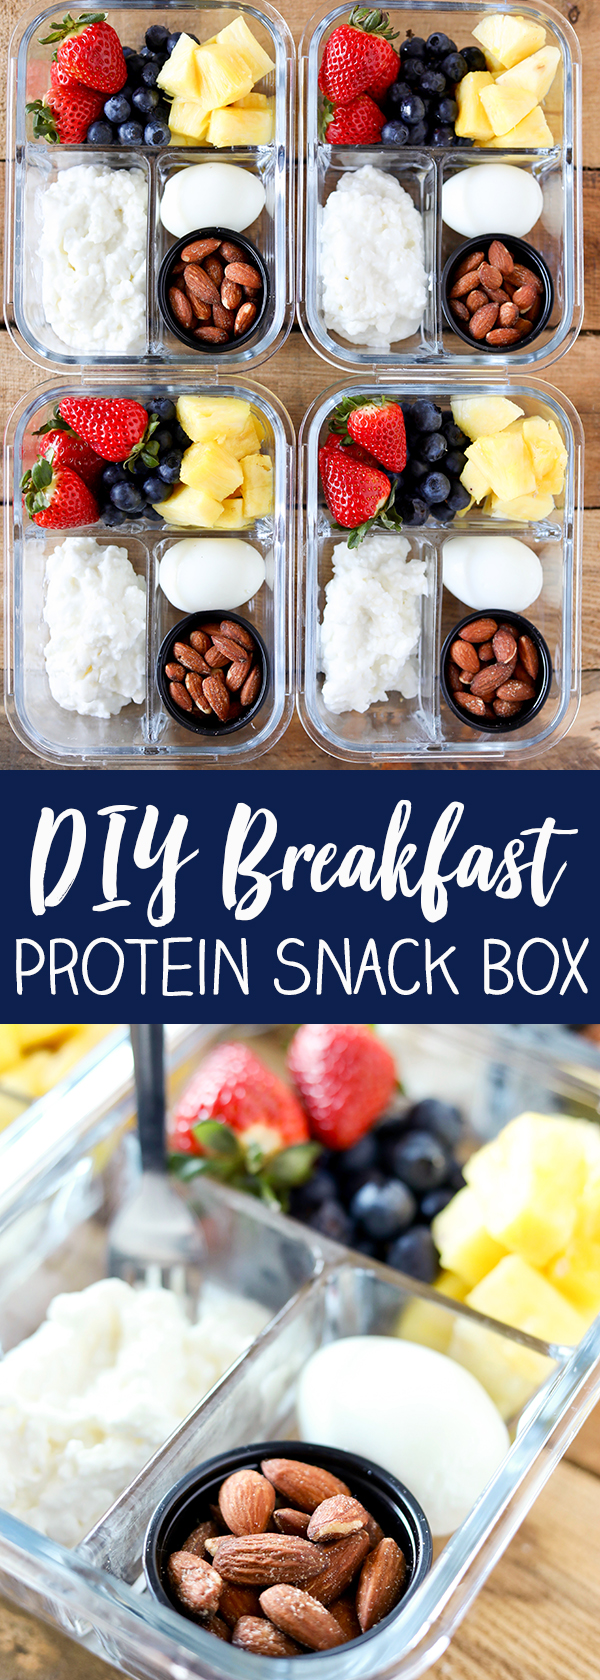 This DIY Breakfast Protein Snack Box is so easy to put together and perfect for grab and go or taking to work. These are some of my favorite breakfast foods. Fresh colorful fruit, a hardboiled egg, cottage cheese and roasted almonds for a little crunch. Some mornings are so hectic, it's a lifesaver to have breakfast prepped and ready to go! -More family favorite recipes on number-2-pencil.com. #familyfavorites